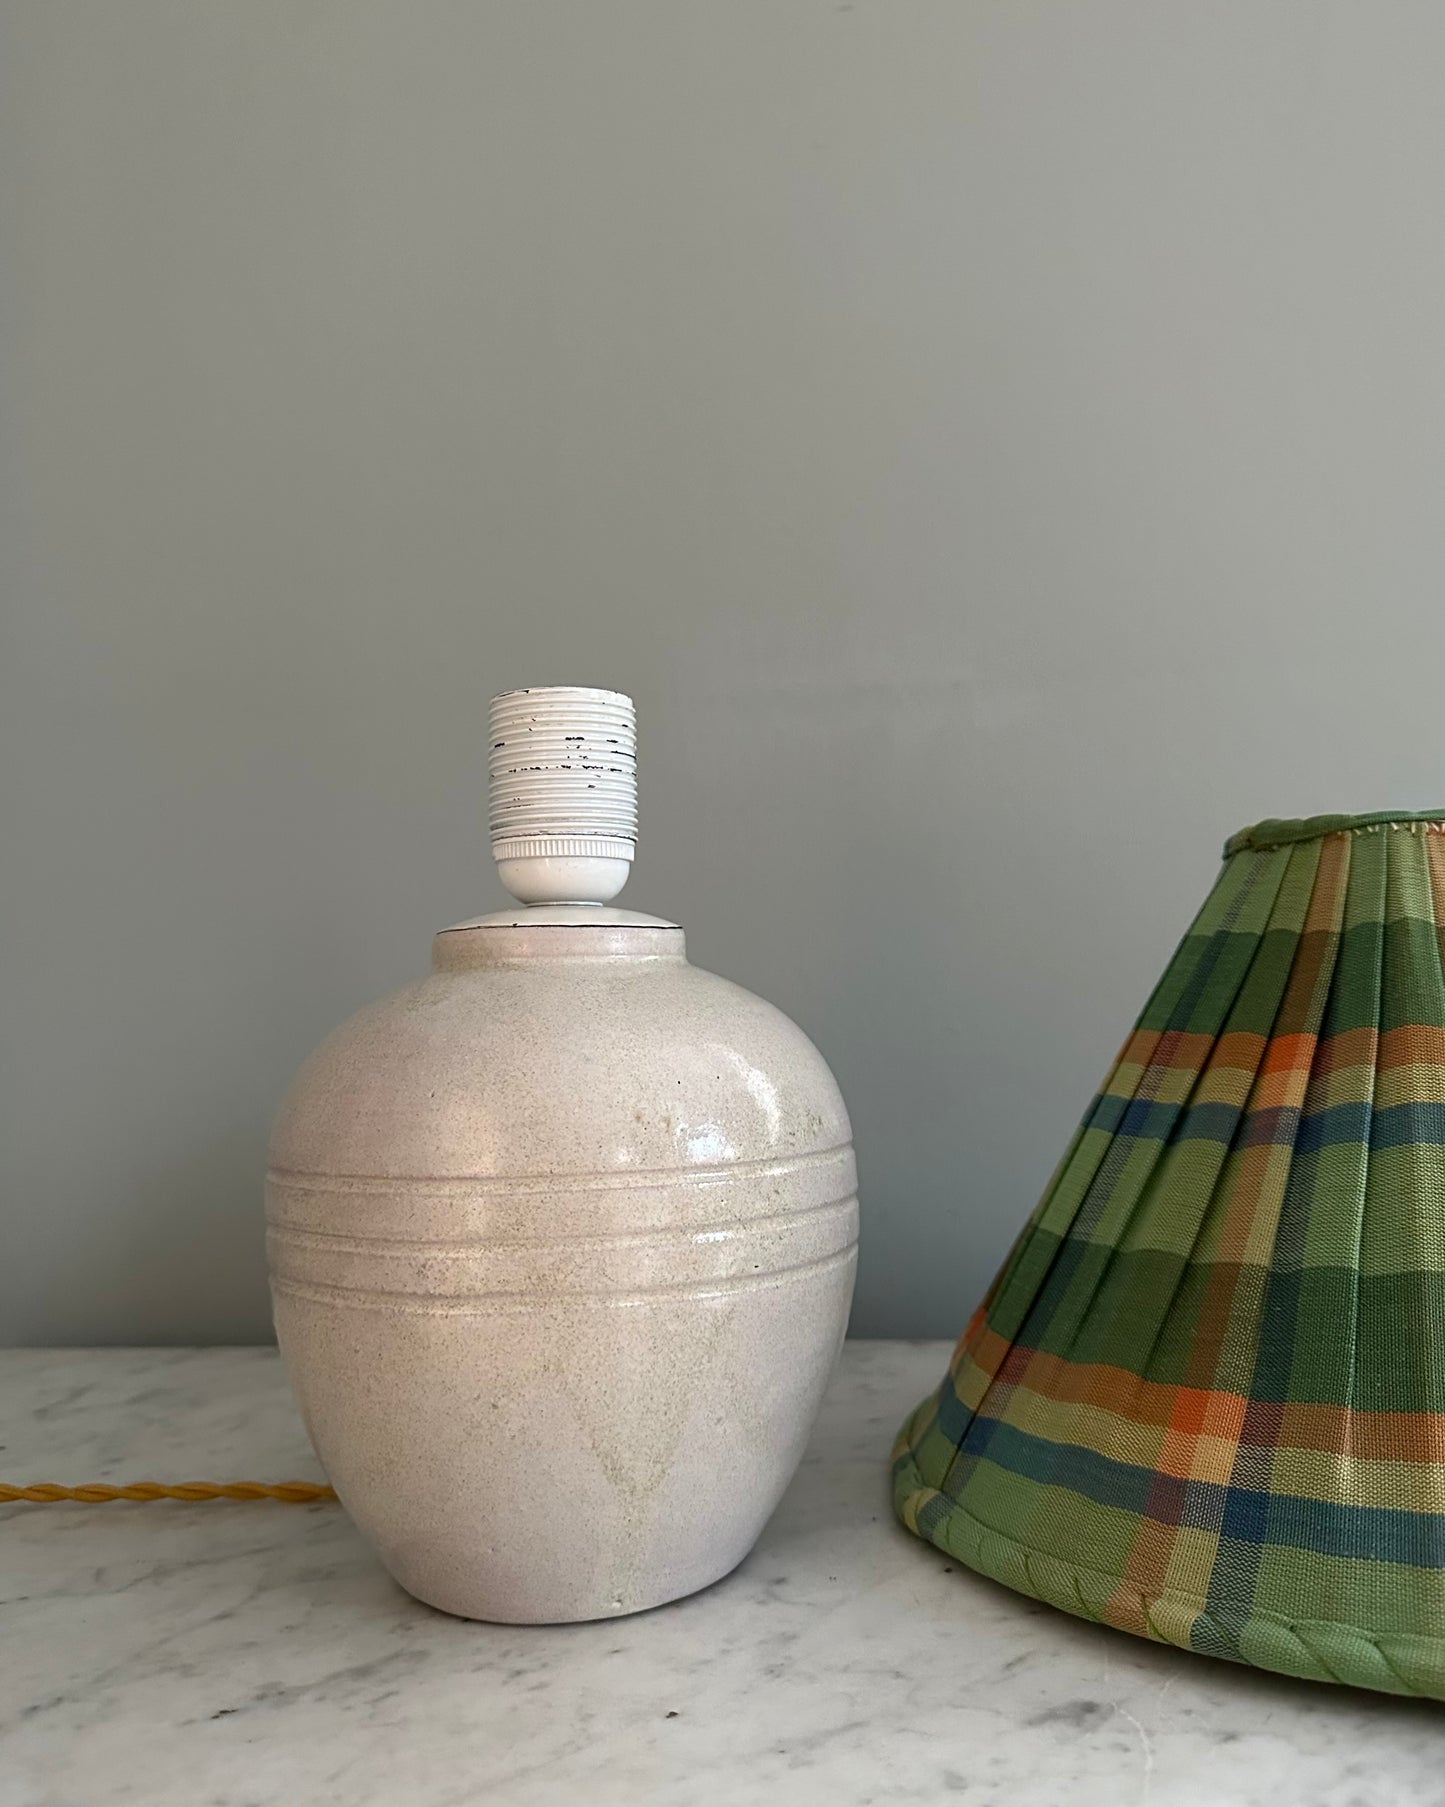 Vintage Table Lamp with Shade